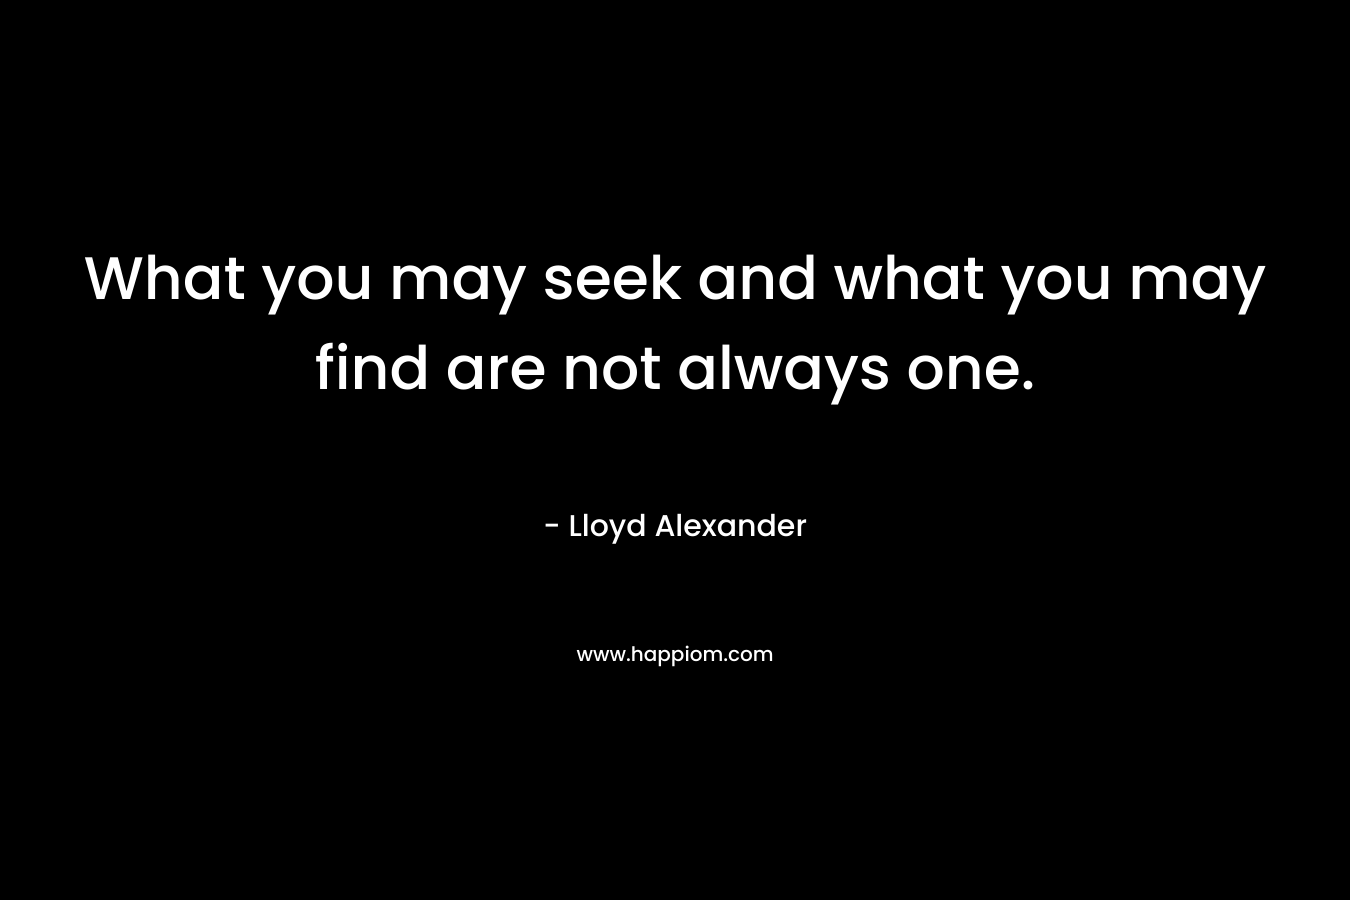 What you may seek and what you may find are not always one.